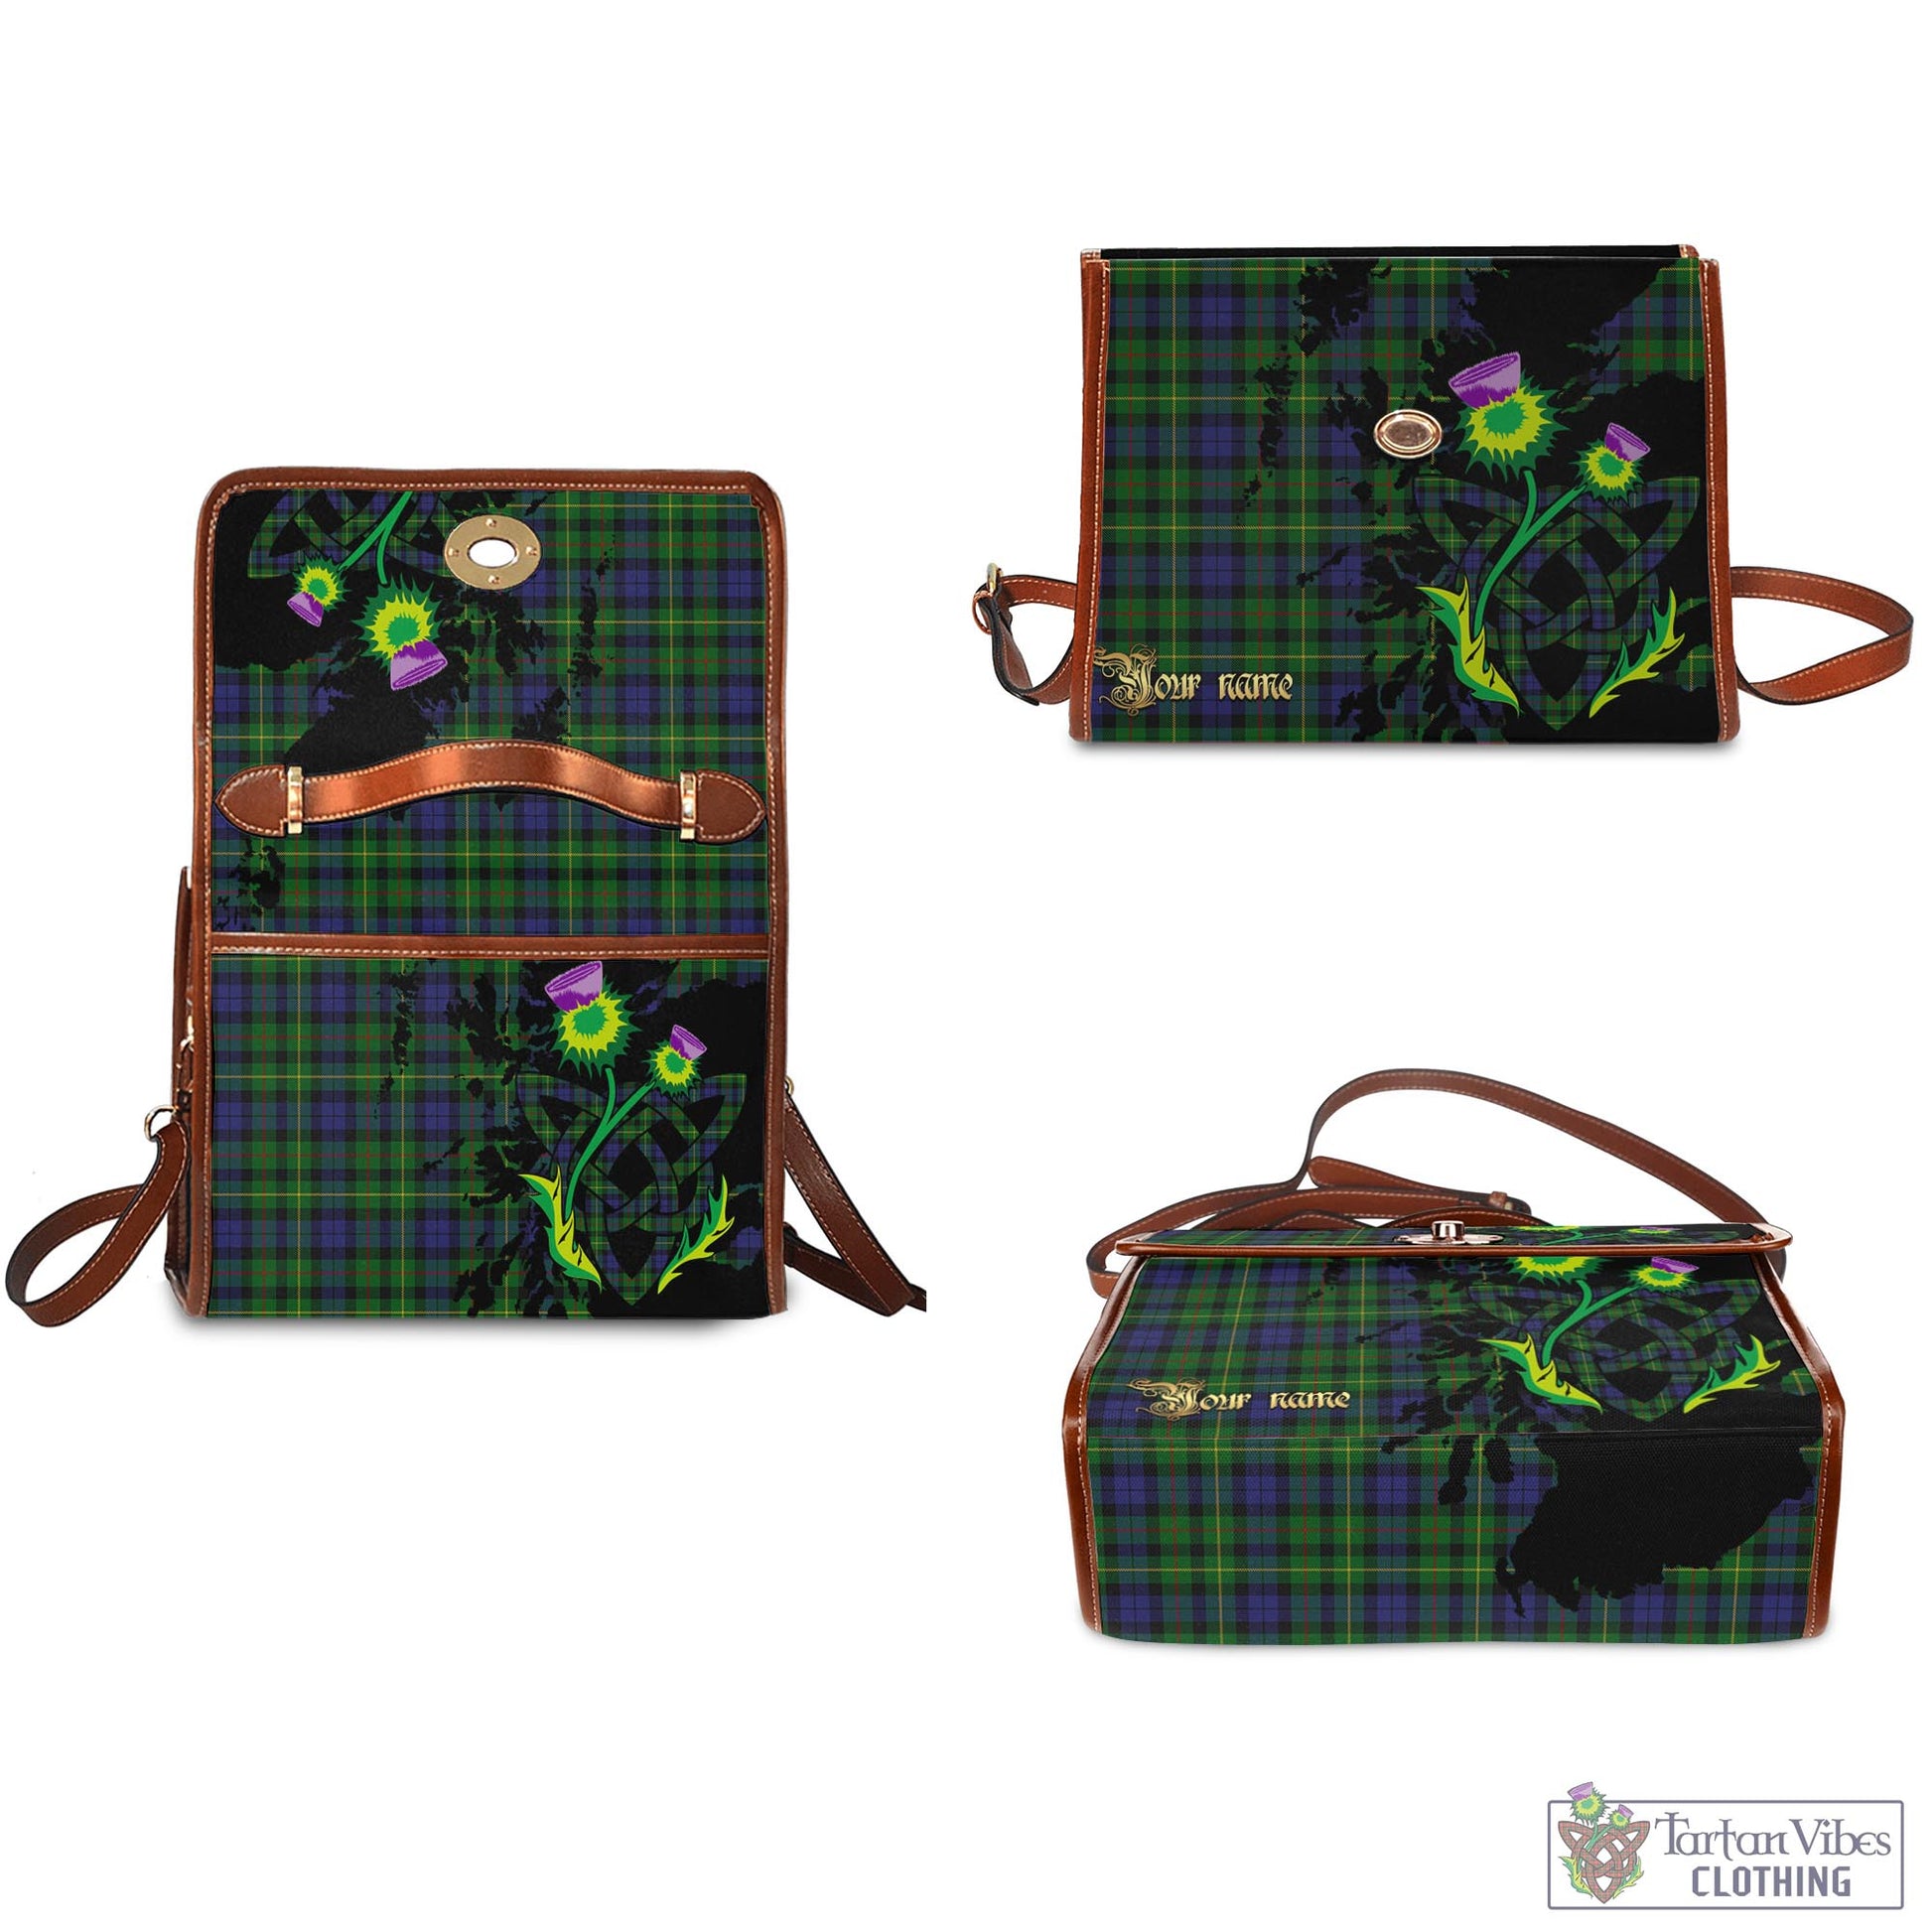 Tartan Vibes Clothing Rollo Tartan Waterproof Canvas Bag with Scotland Map and Thistle Celtic Accents